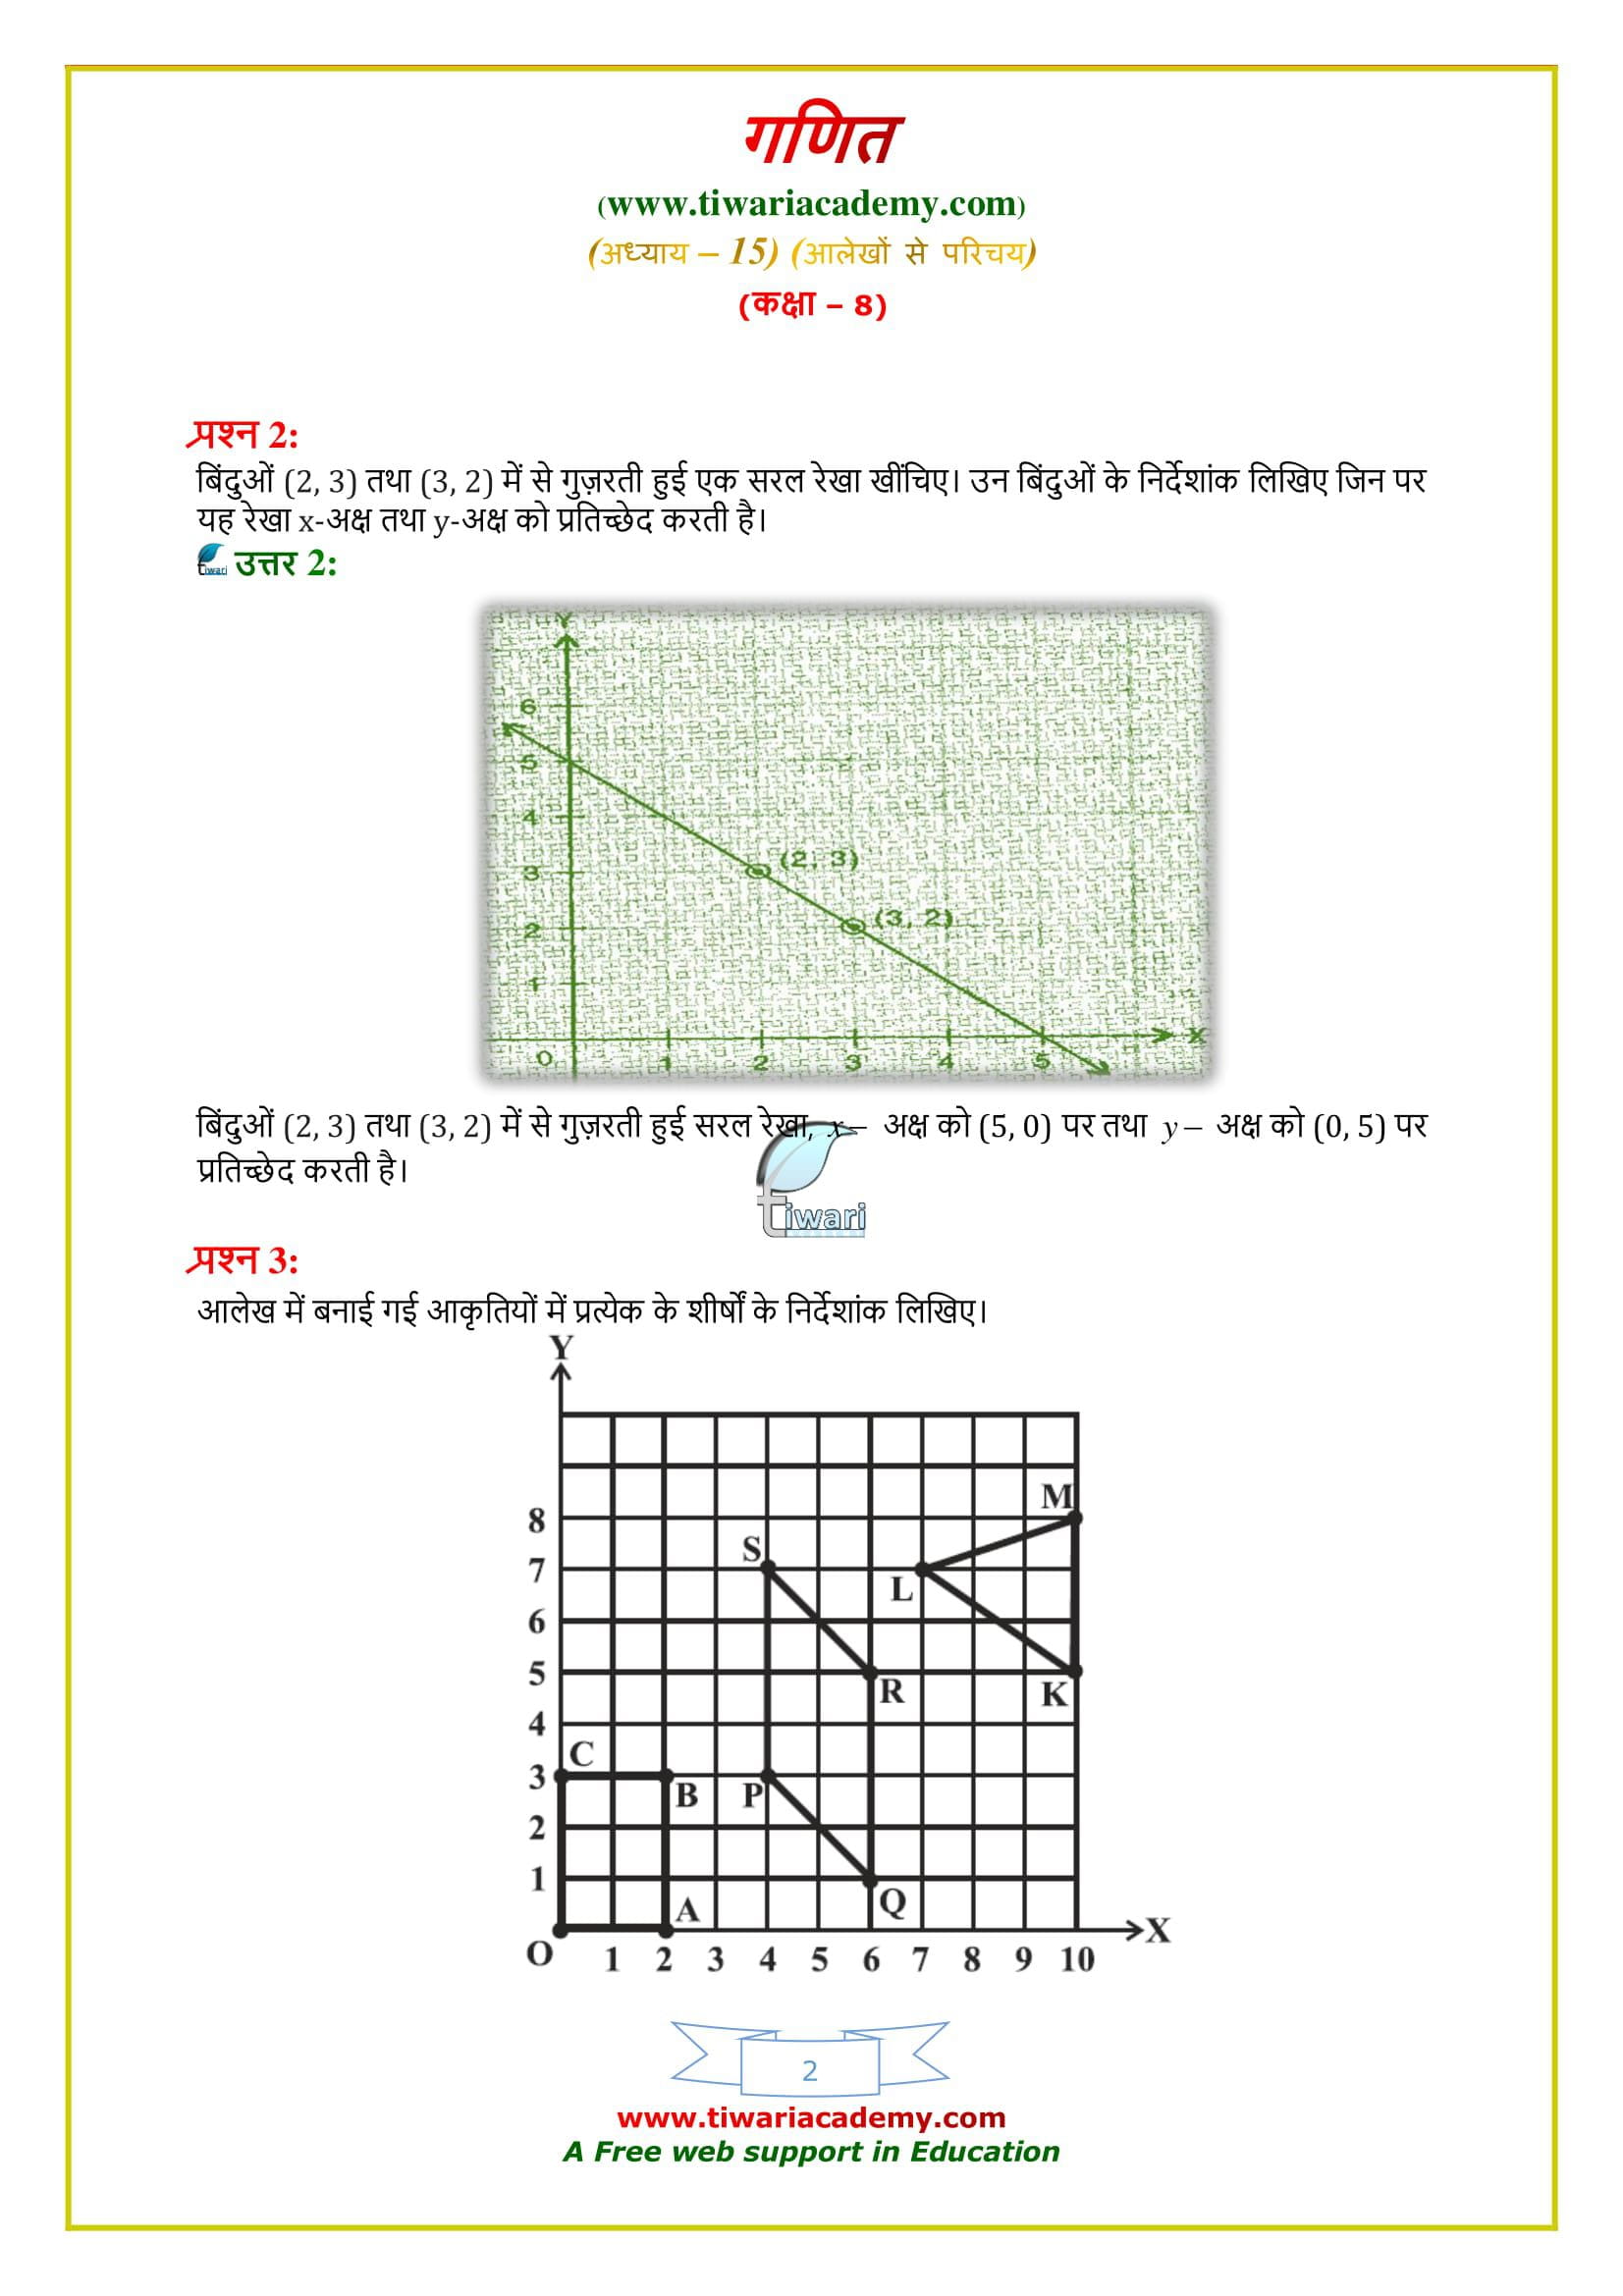 8 Maths Exercise 15.2 solutions in hindi medium in updated form for 2020 – 2021 cbse syllabus